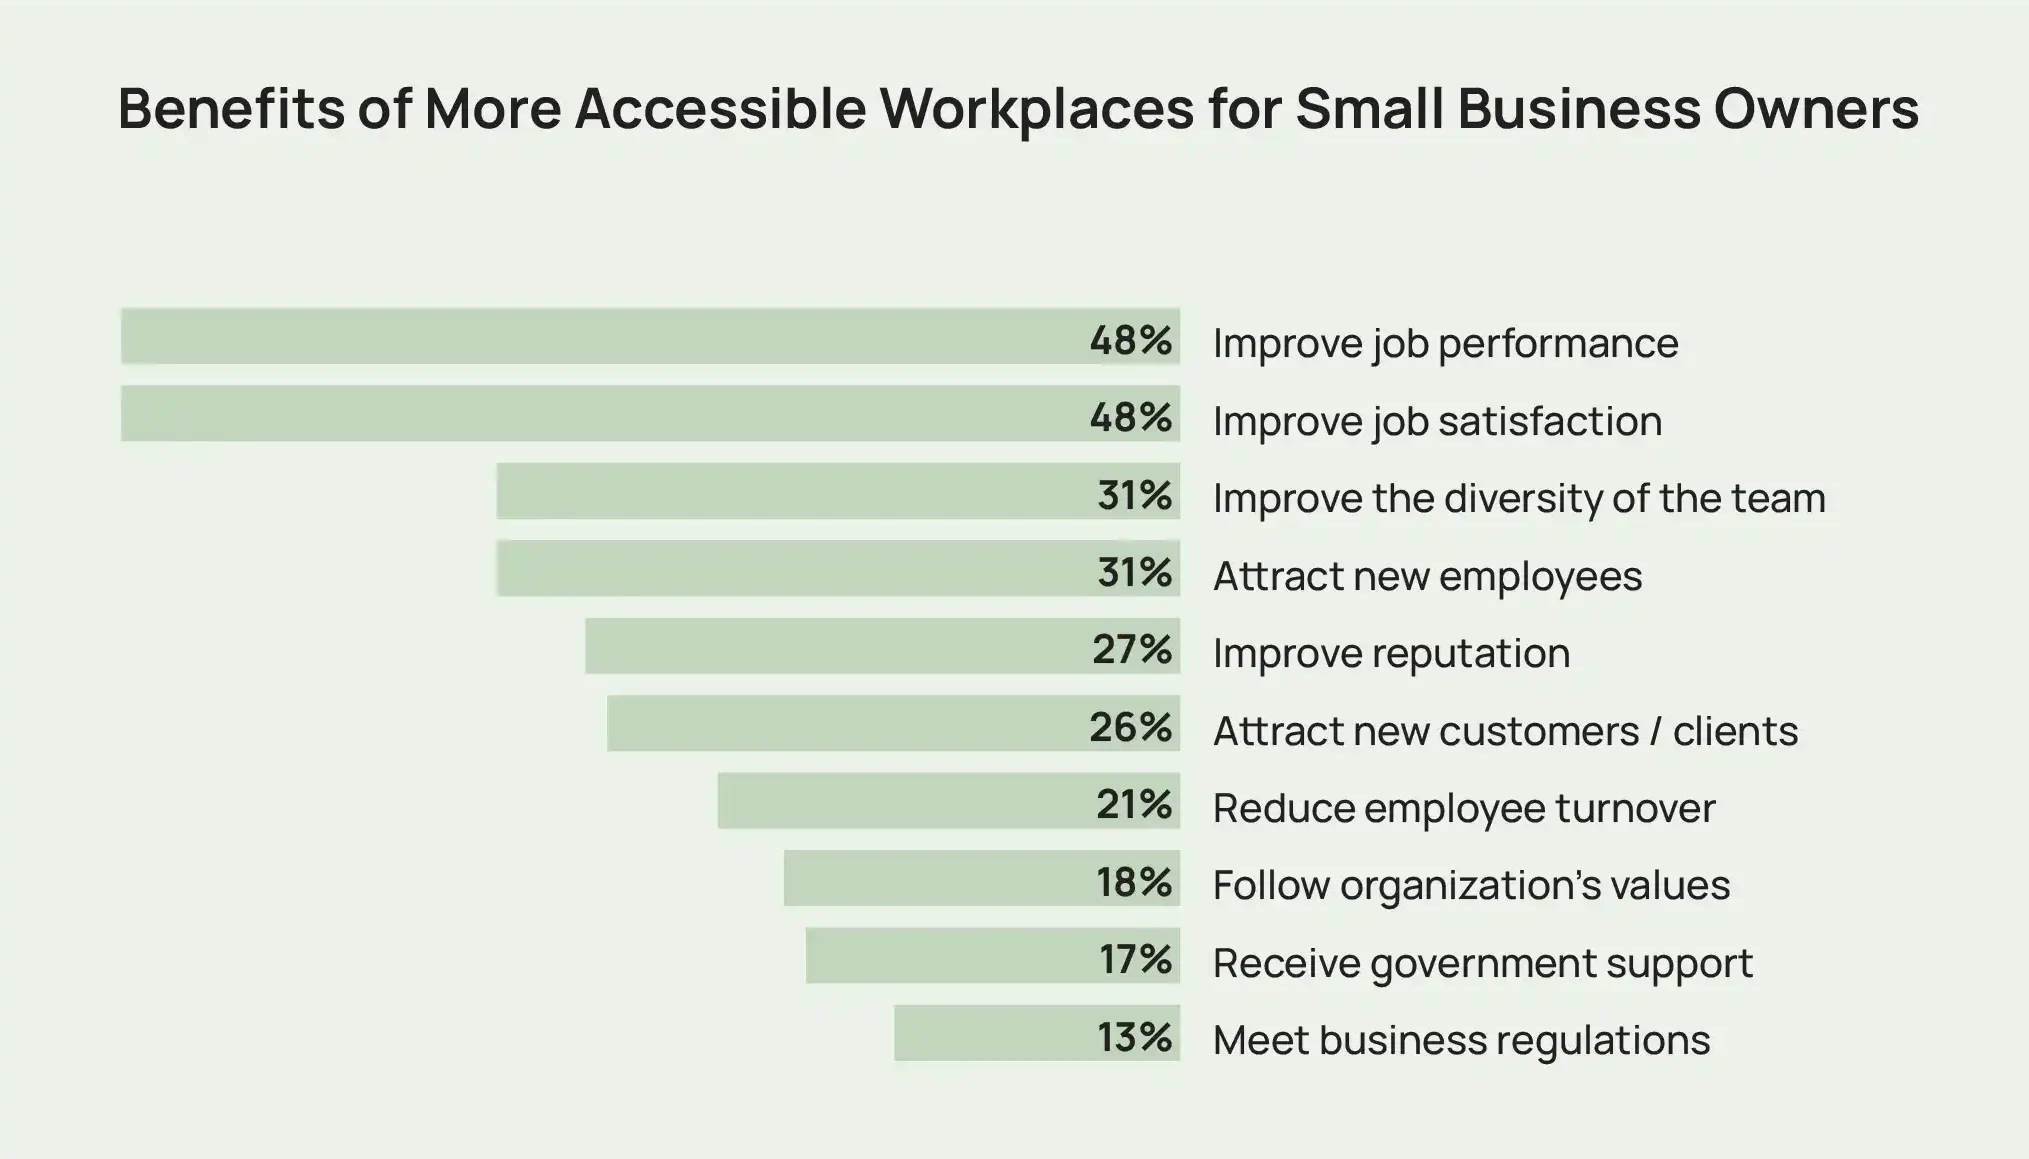 A bar graph showing examples of benefits of more accessible workplaces for small business owners, including improved job performance and satisfaction.